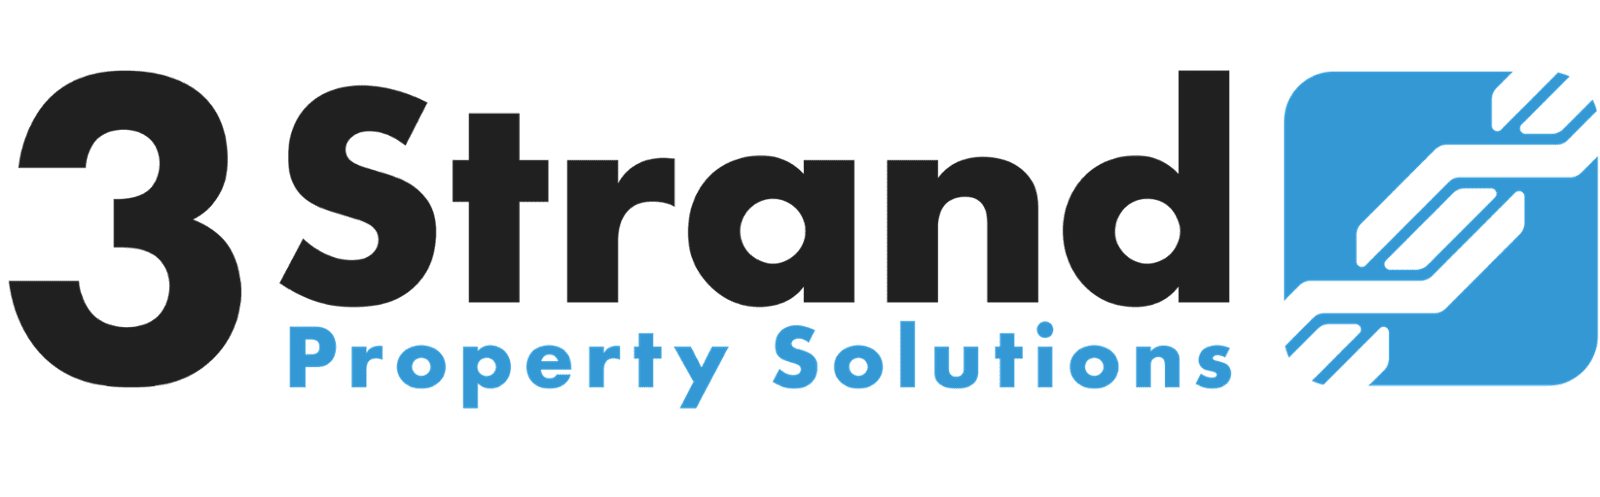 3 Strand Property Solutions